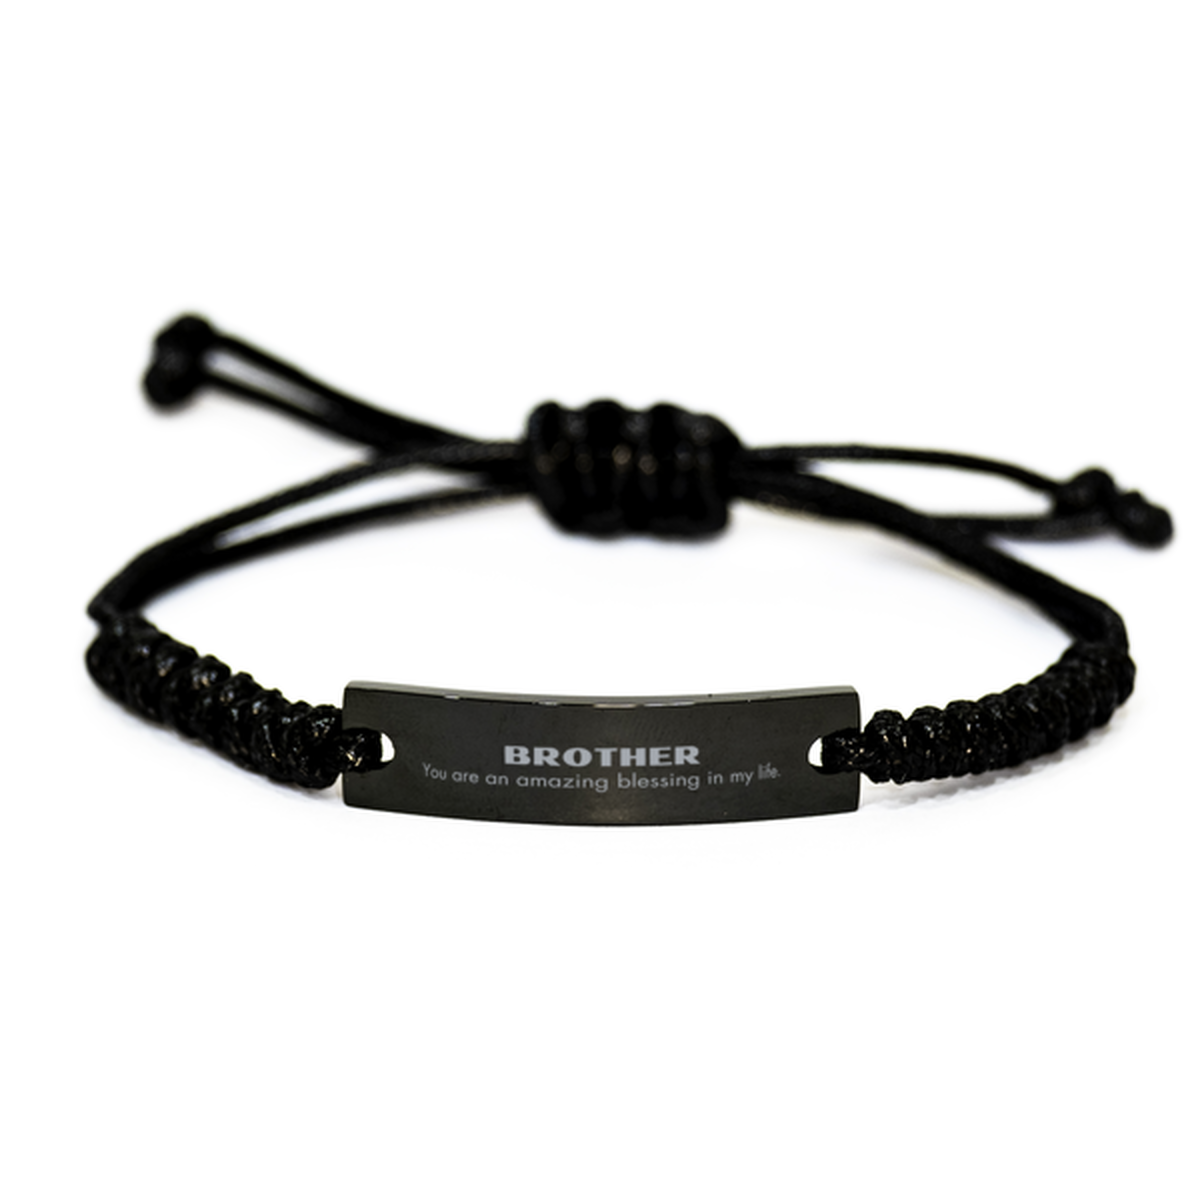 Brother Black Rope Bracelet, You are an amazing blessing in my life, Thank You Gifts For Brother, Inspirational Birthday Christmas Unique Gifts For Brother